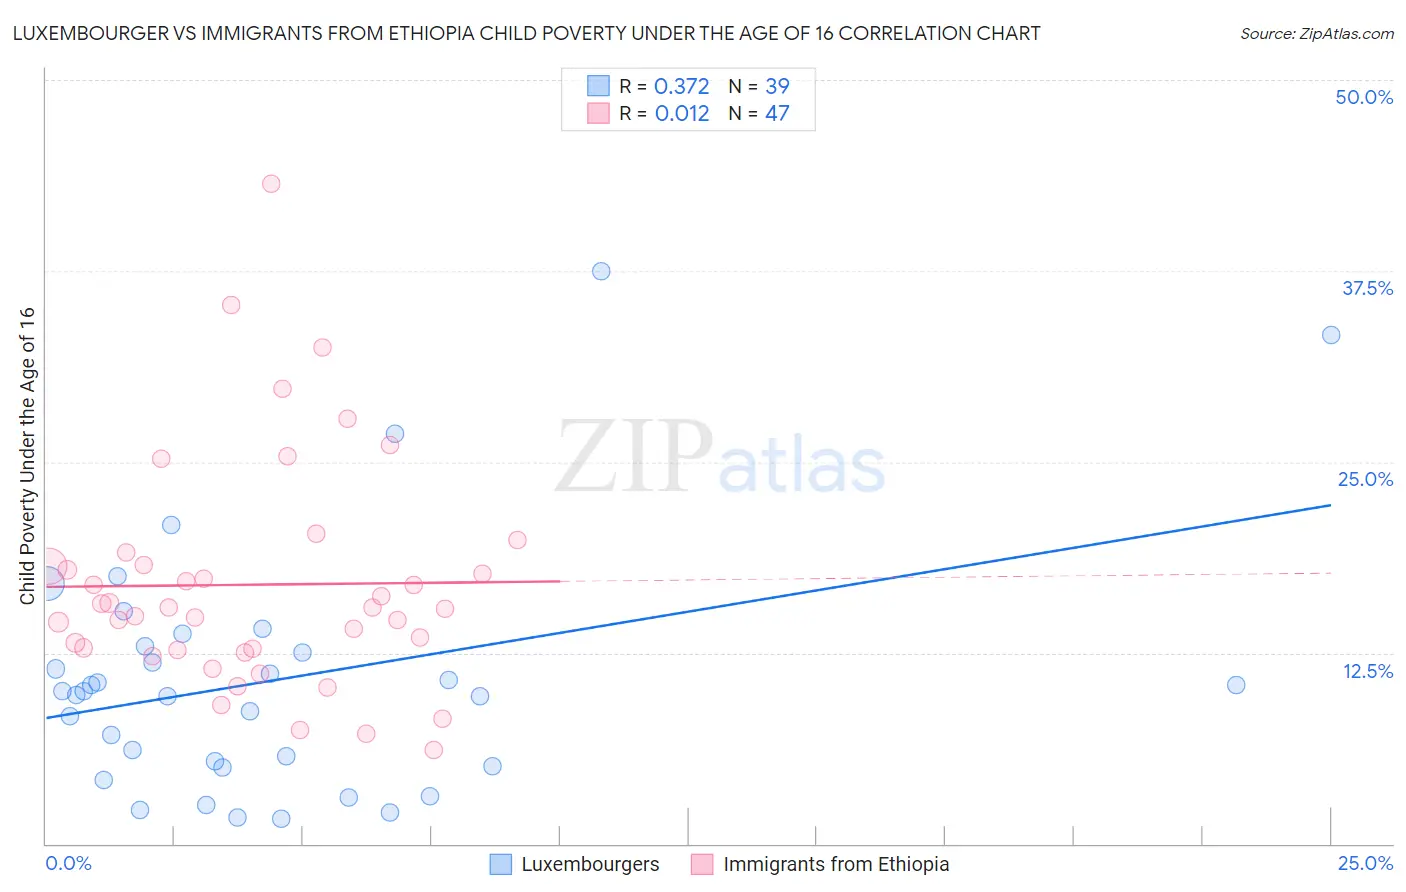 Luxembourger vs Immigrants from Ethiopia Child Poverty Under the Age of 16